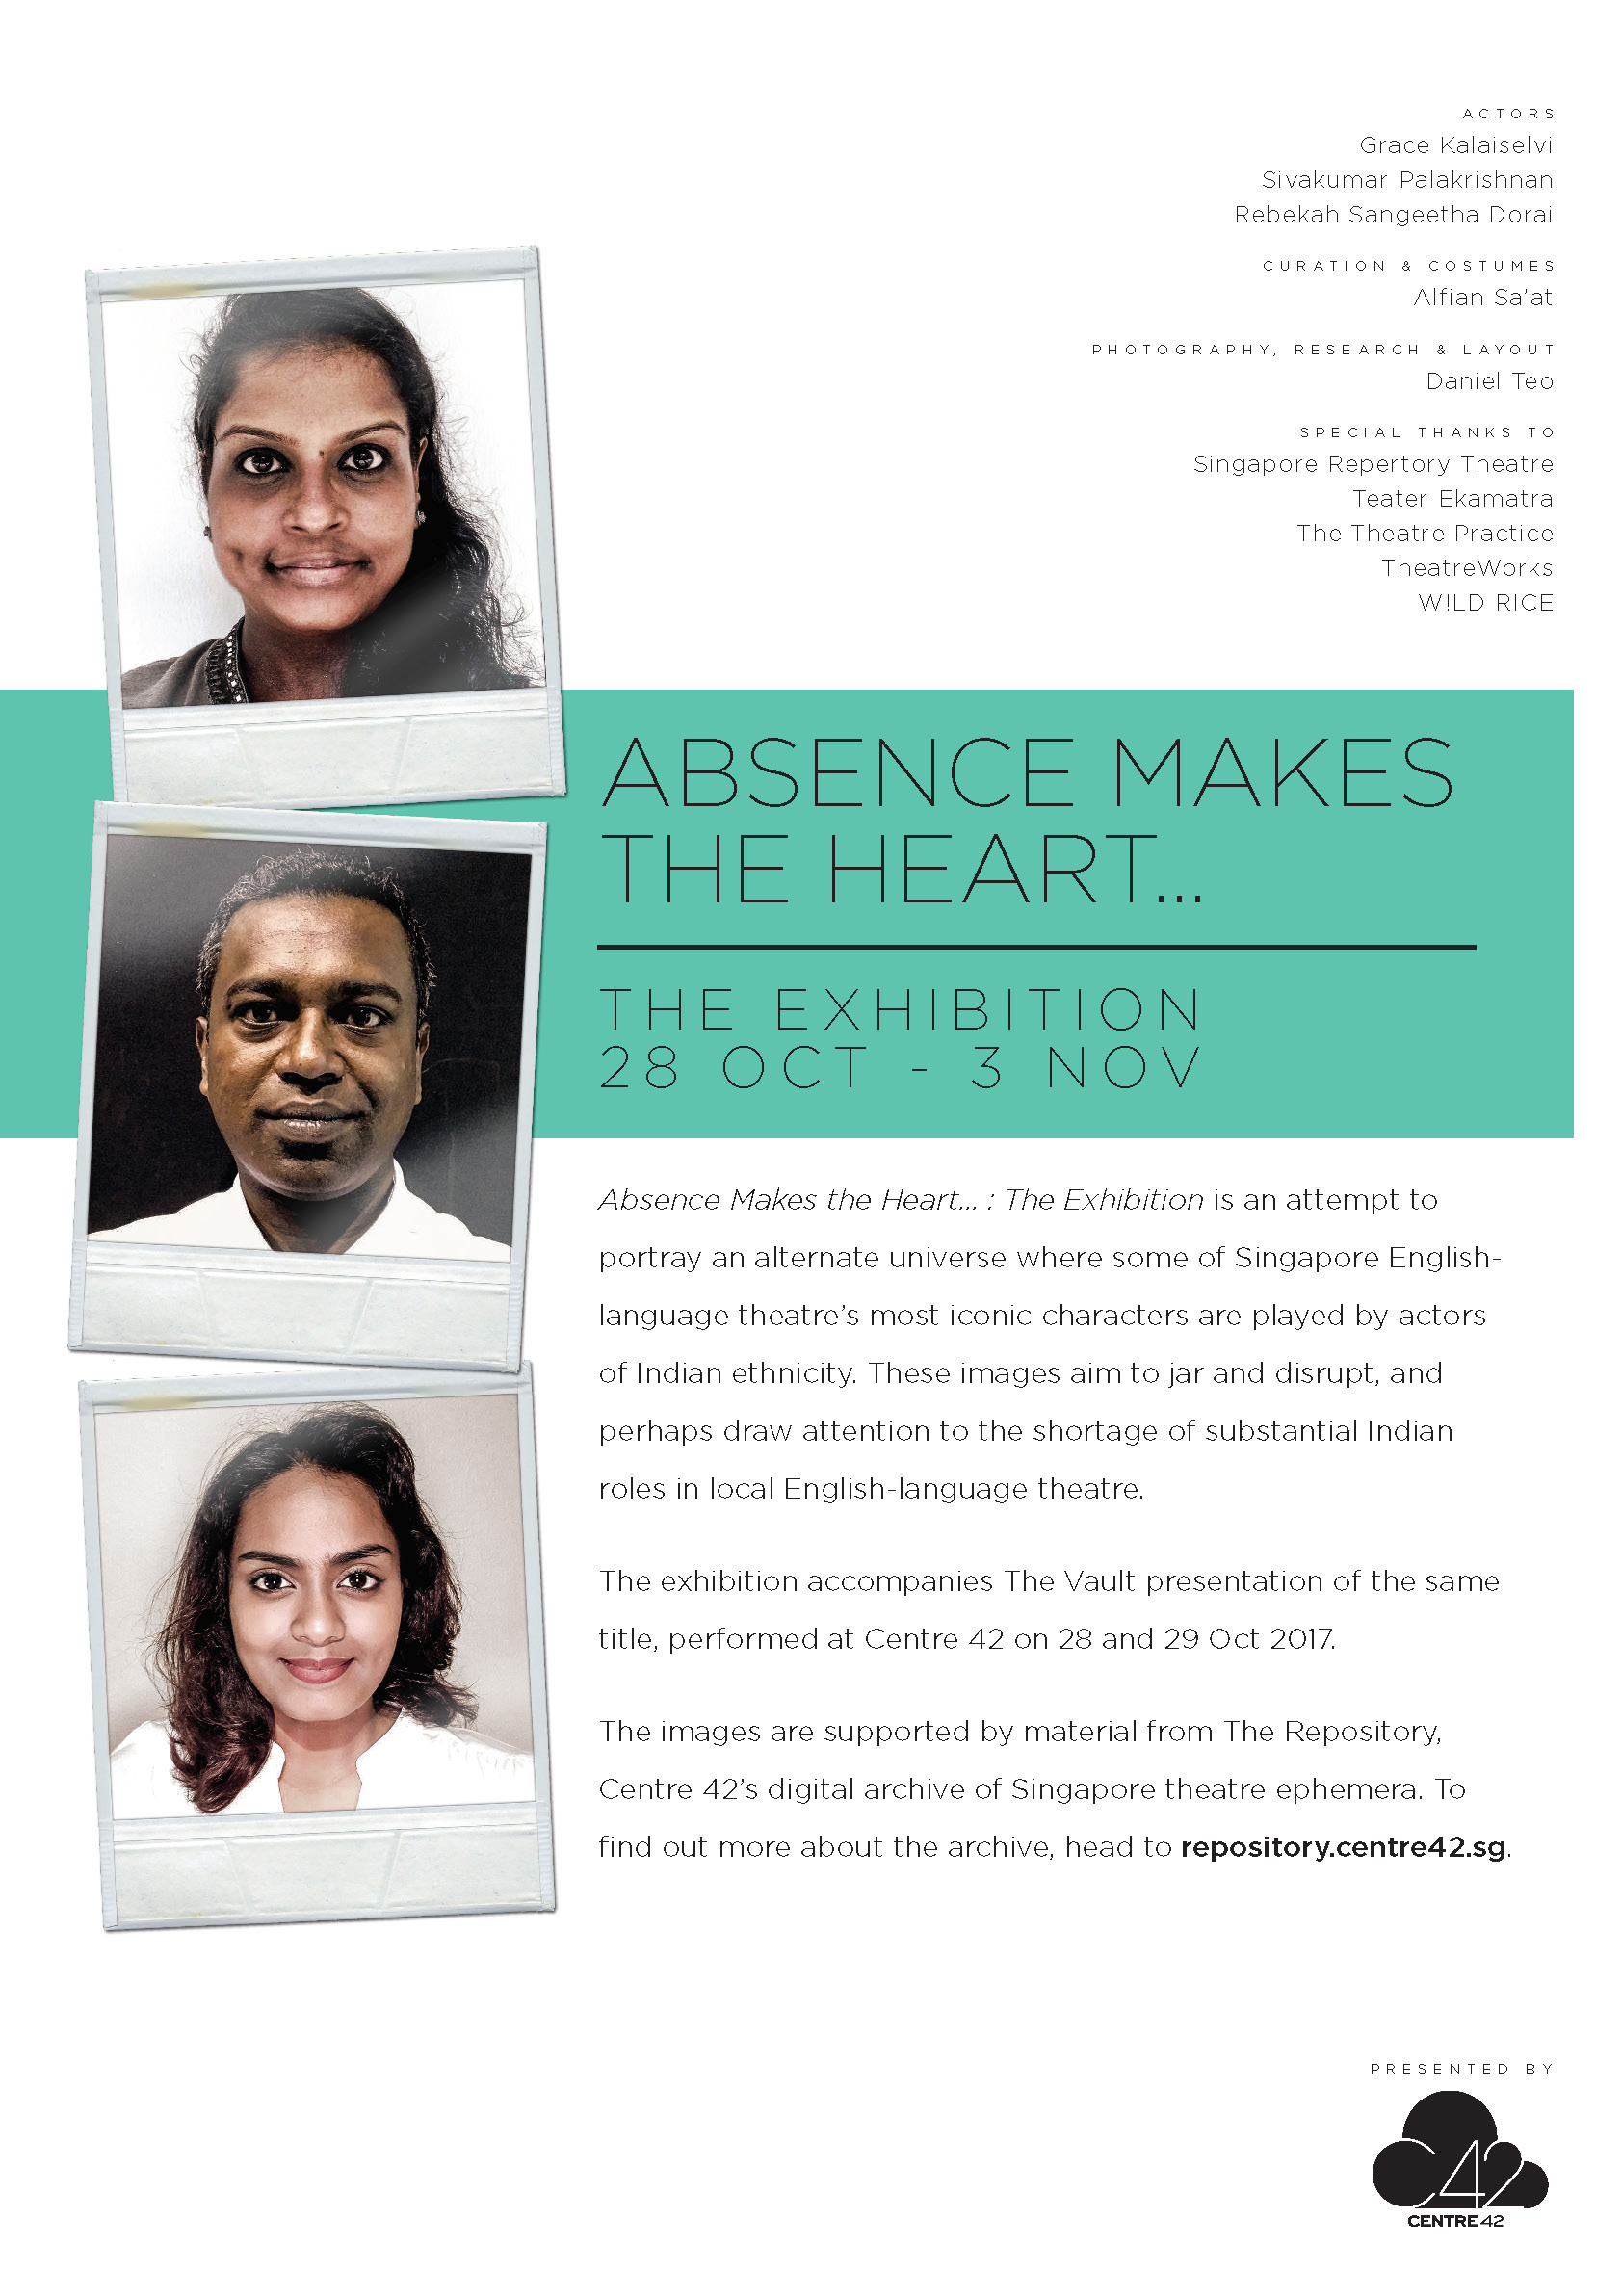 The poster features photographs of two Indian women and one Indian man on the left, and an abstract introducing the exhibition on the right.